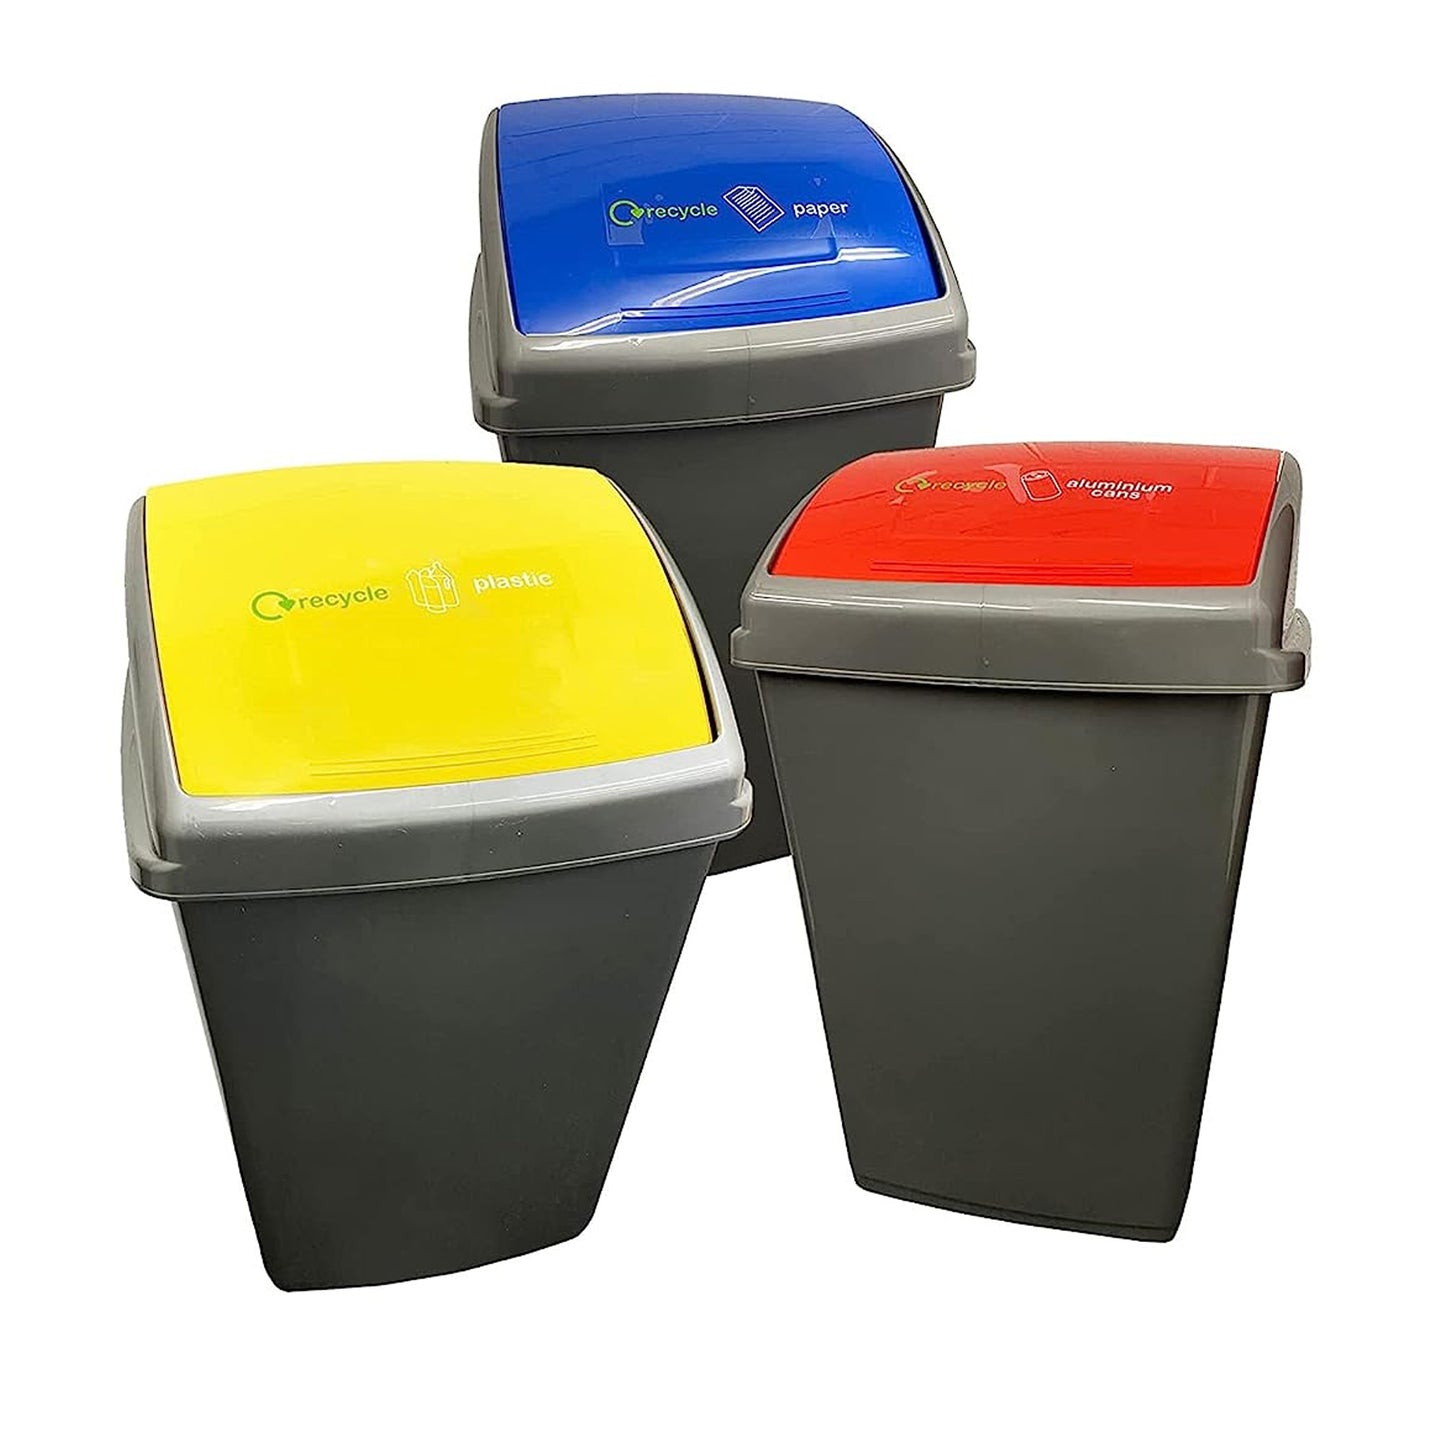 Grey 50 Litre Plastic Recycling Bins For Home & Office Complete With Colour Coded Lids